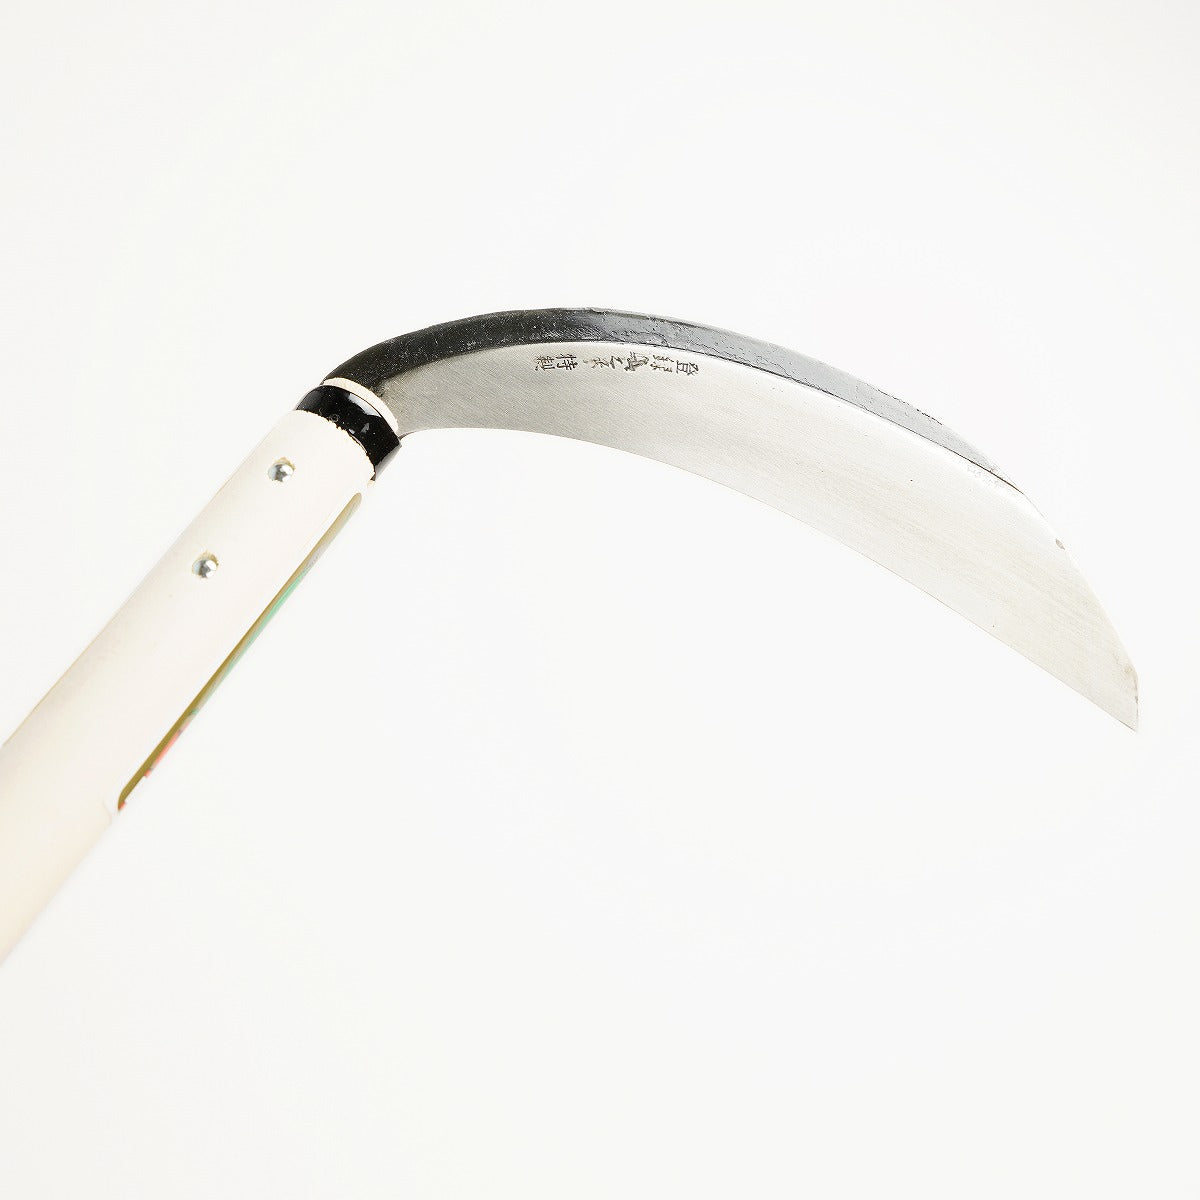 INARIJIKA Mowing Sickle for Right Hander, Blade Length : 180mm(abt 7.1"), Made in Bansyu Miki, Japan